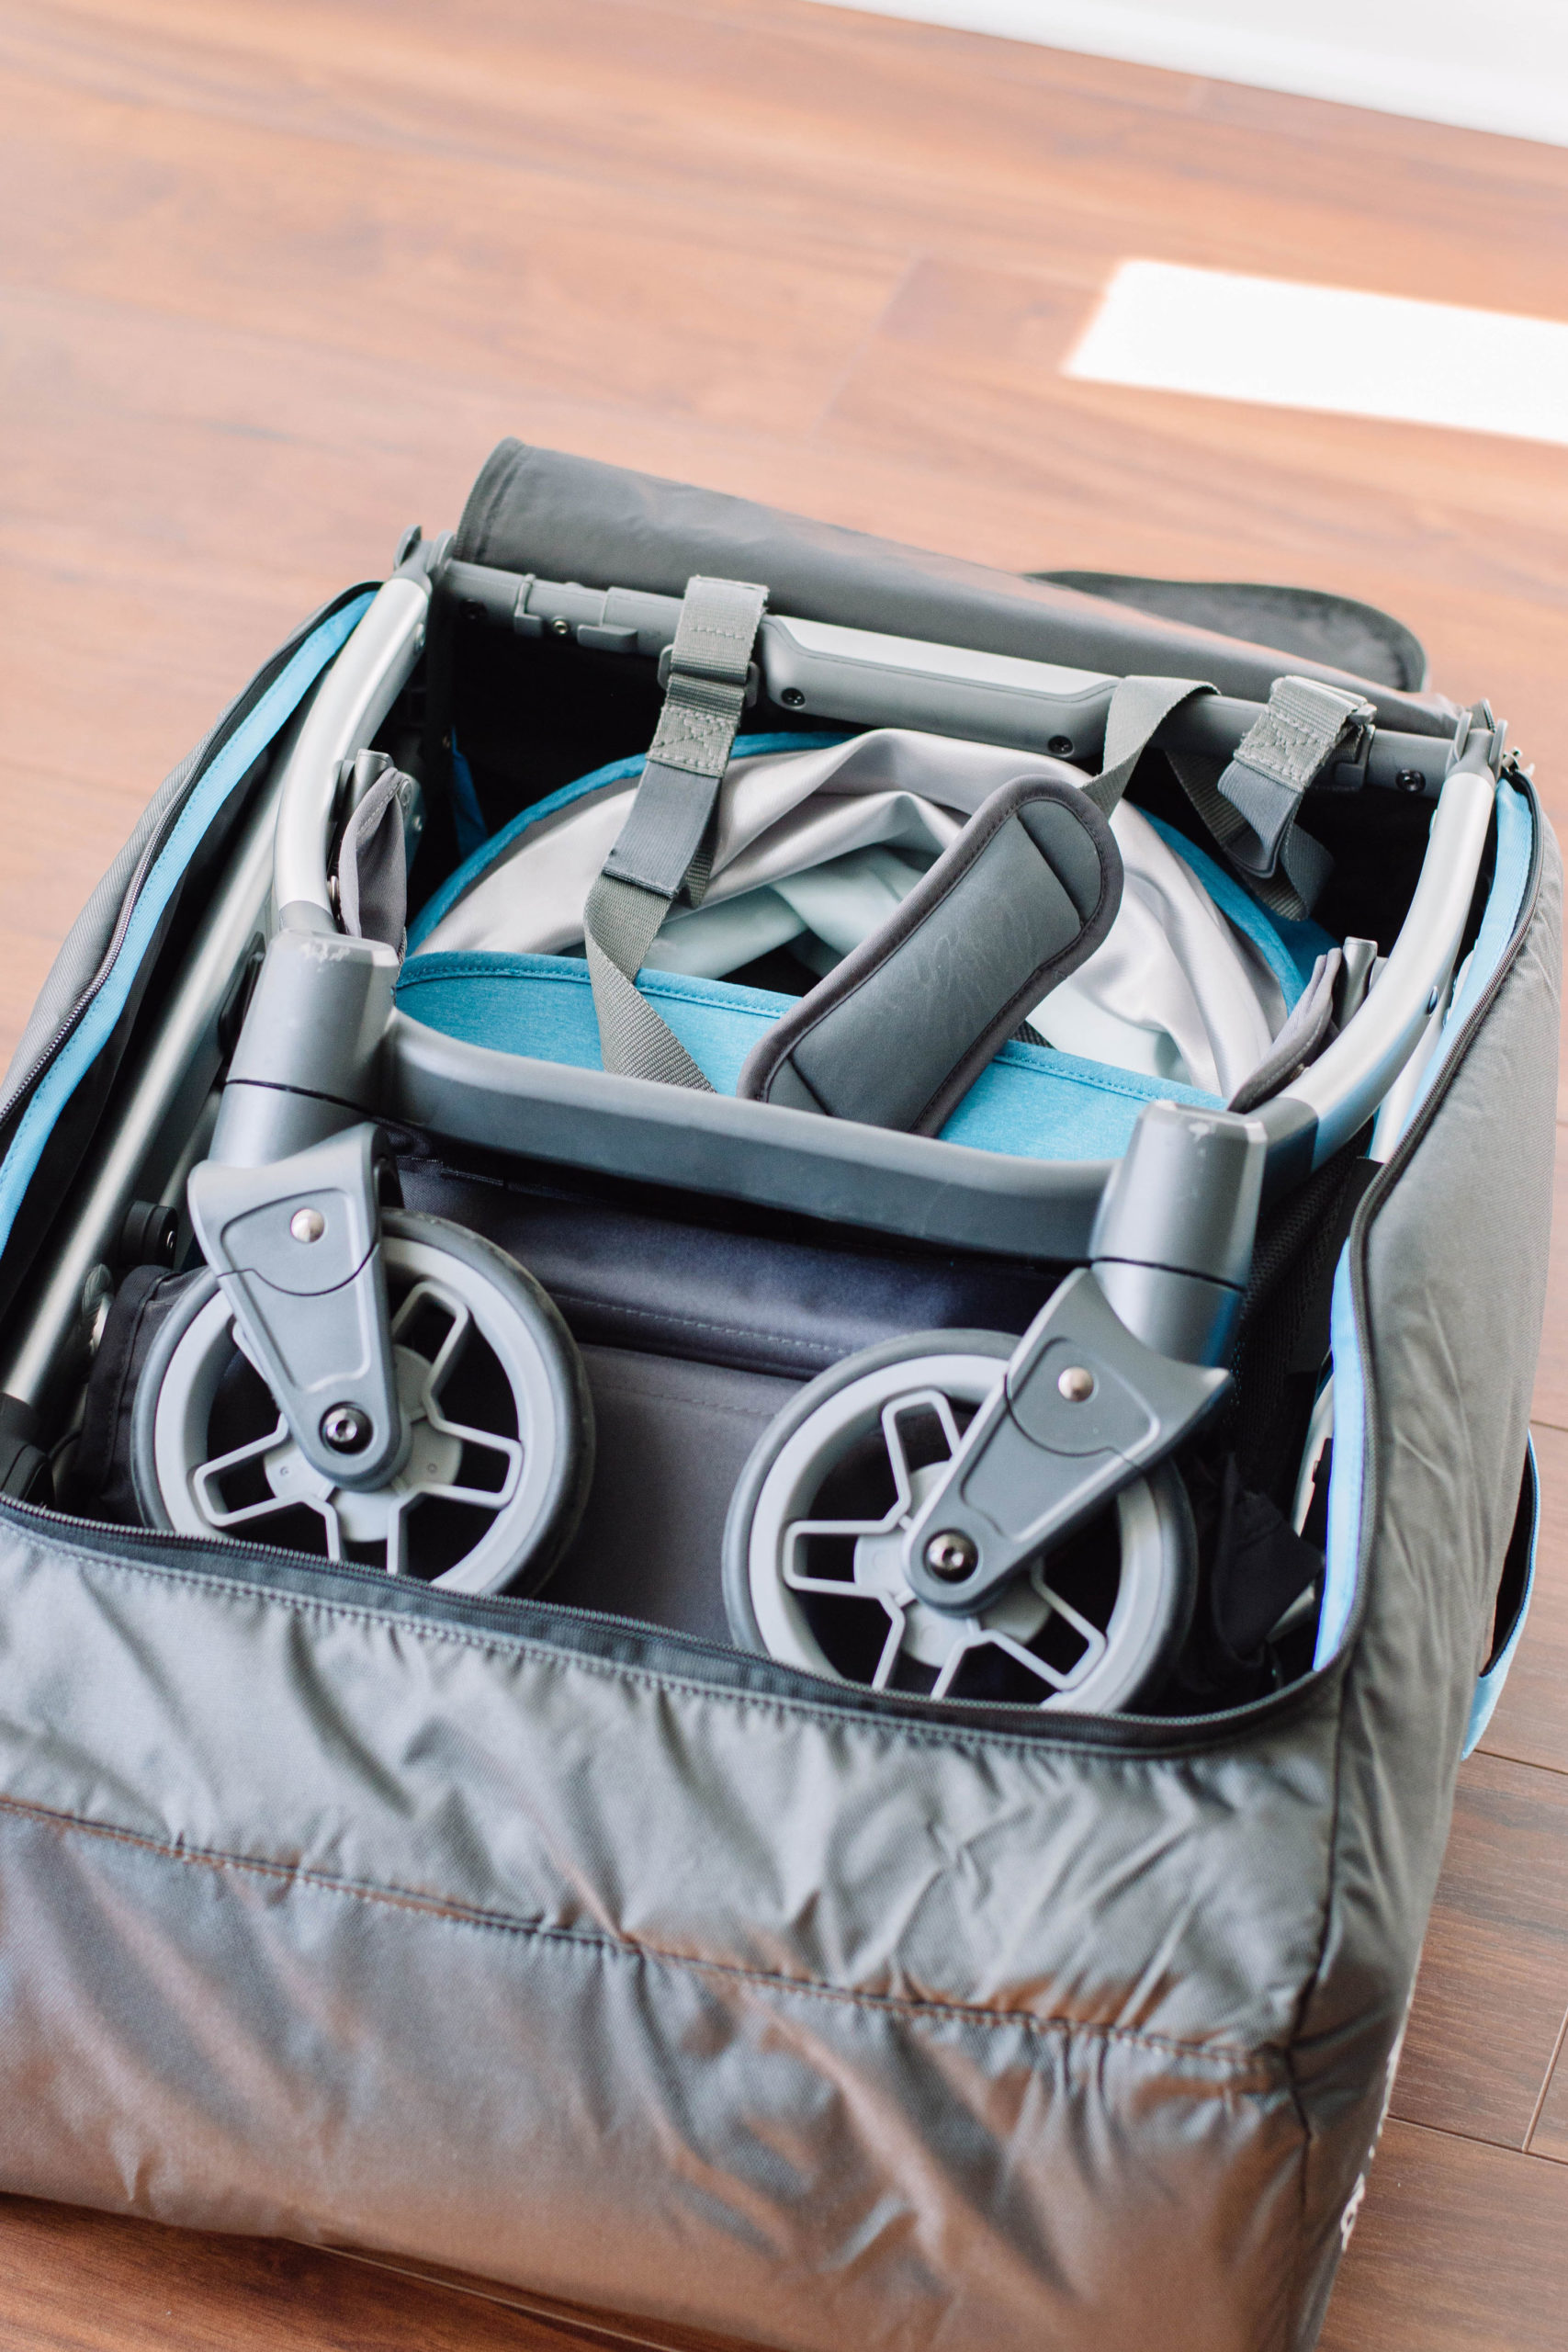 Mr. Toddler and I strolling along in the UPPAbaby MINU - here's our full UPPAbaby MINU Review so that you can make the best stroller decision for you and your fam.